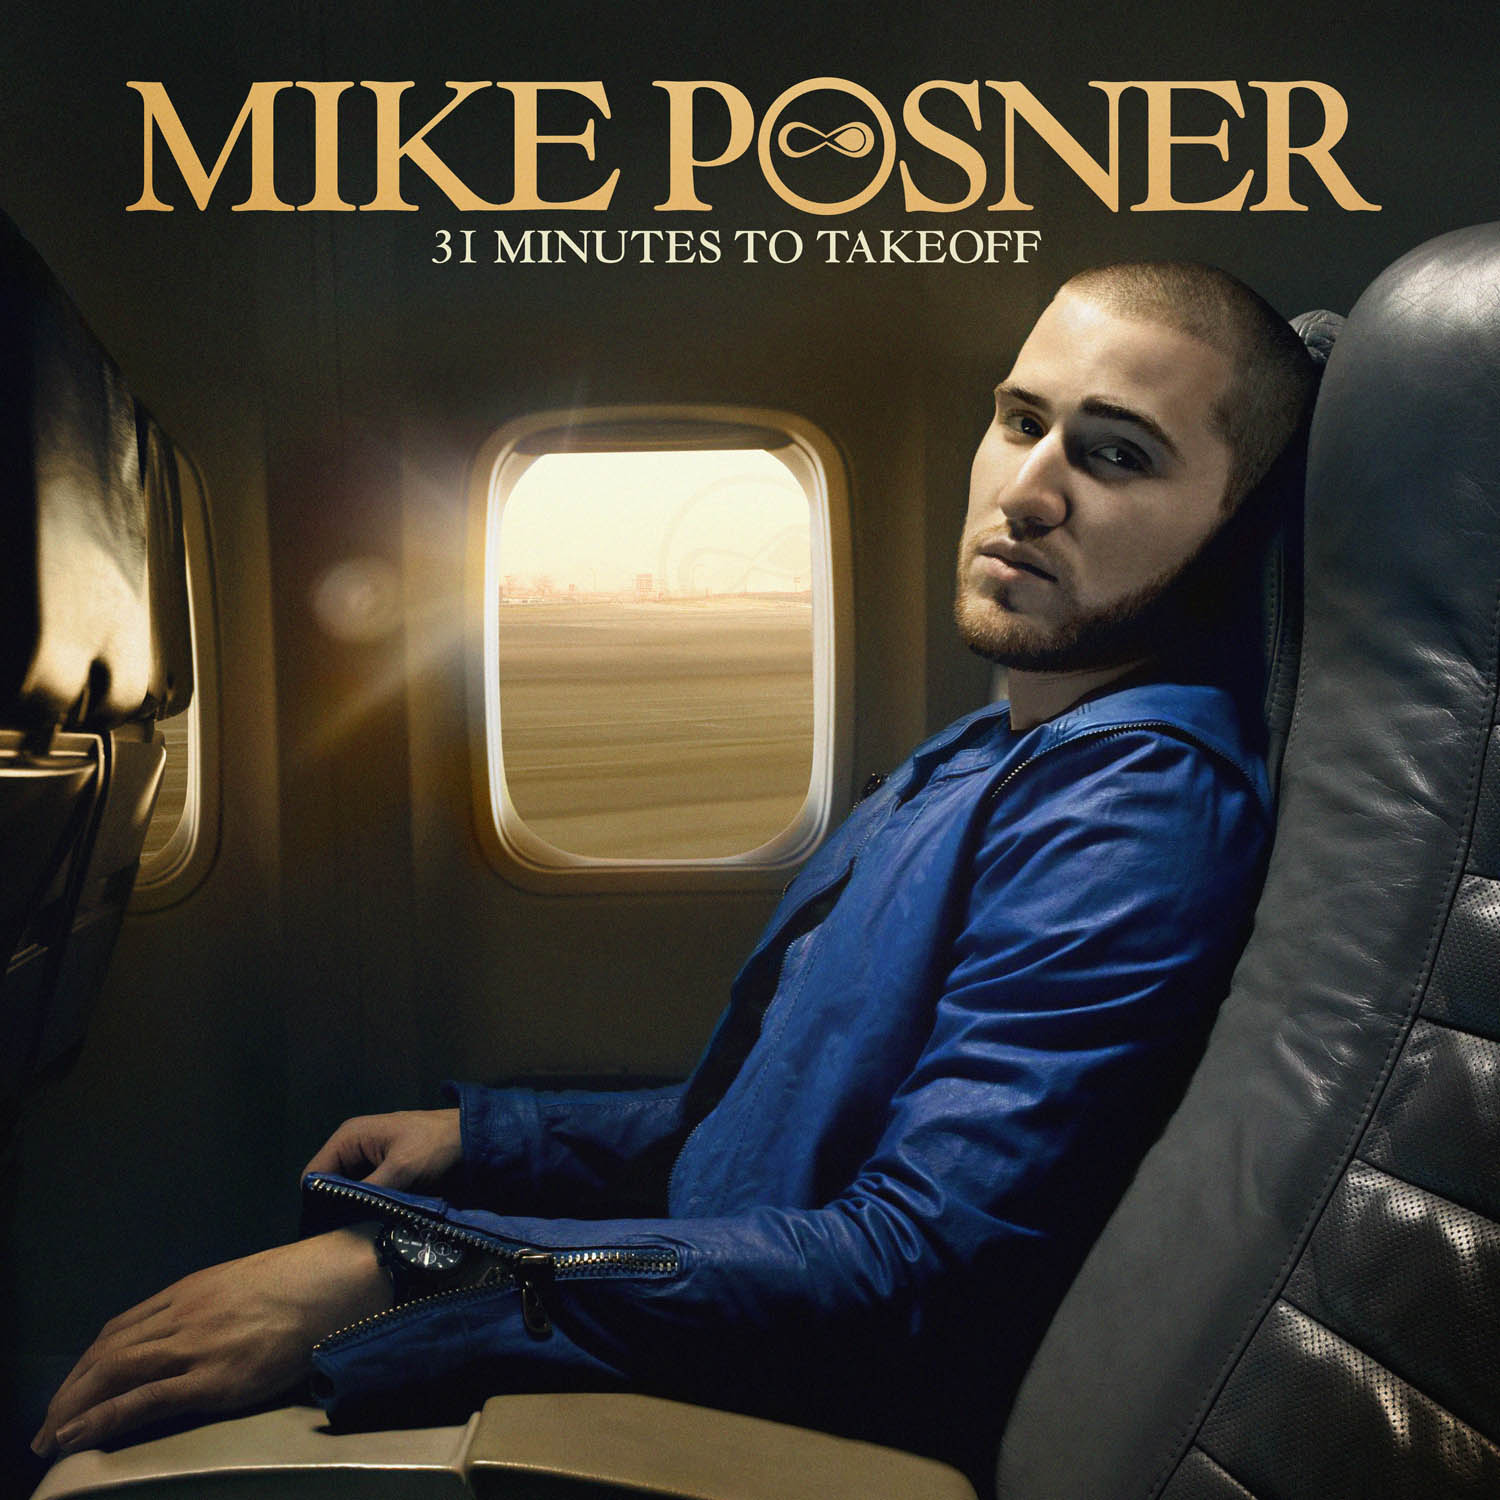 Mike Posner - 31 Minutes To Takeoff (cover artwork)
